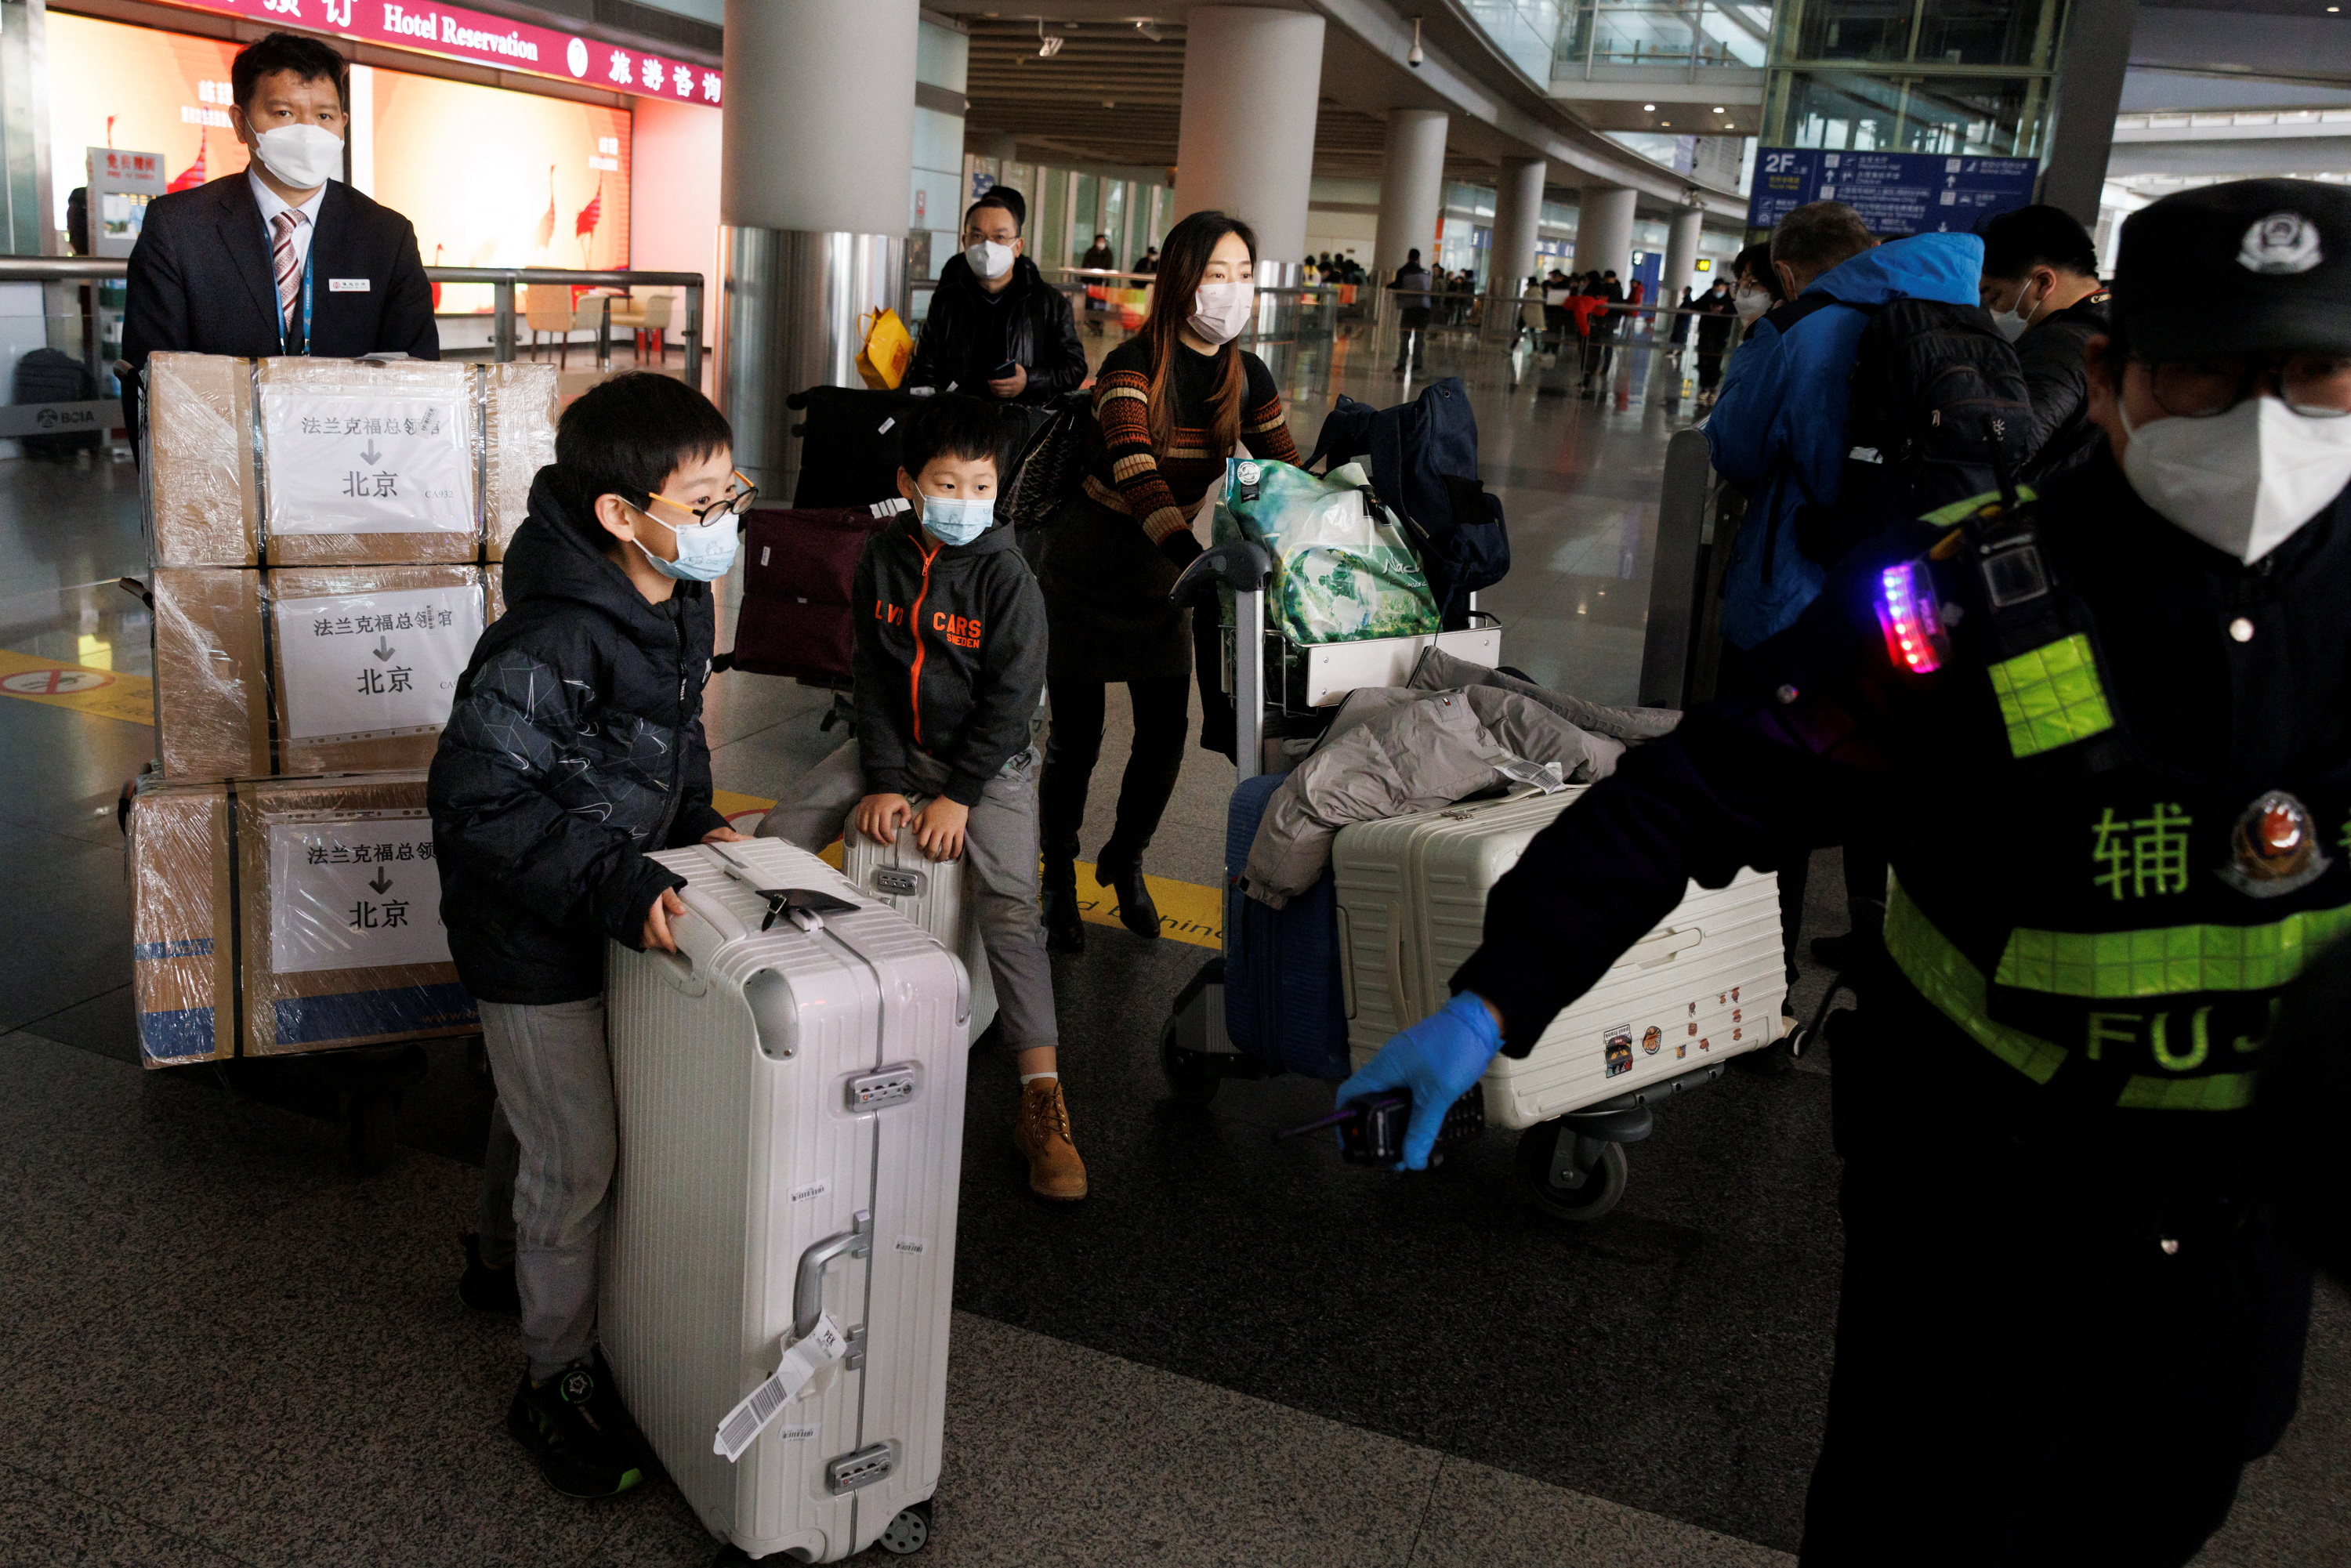 Passengers push their luggage through the international arrivals hall at Beijing Capital International Airport after China lifted the COVID-19 quarantine requirement for inbound travellers in Beijing